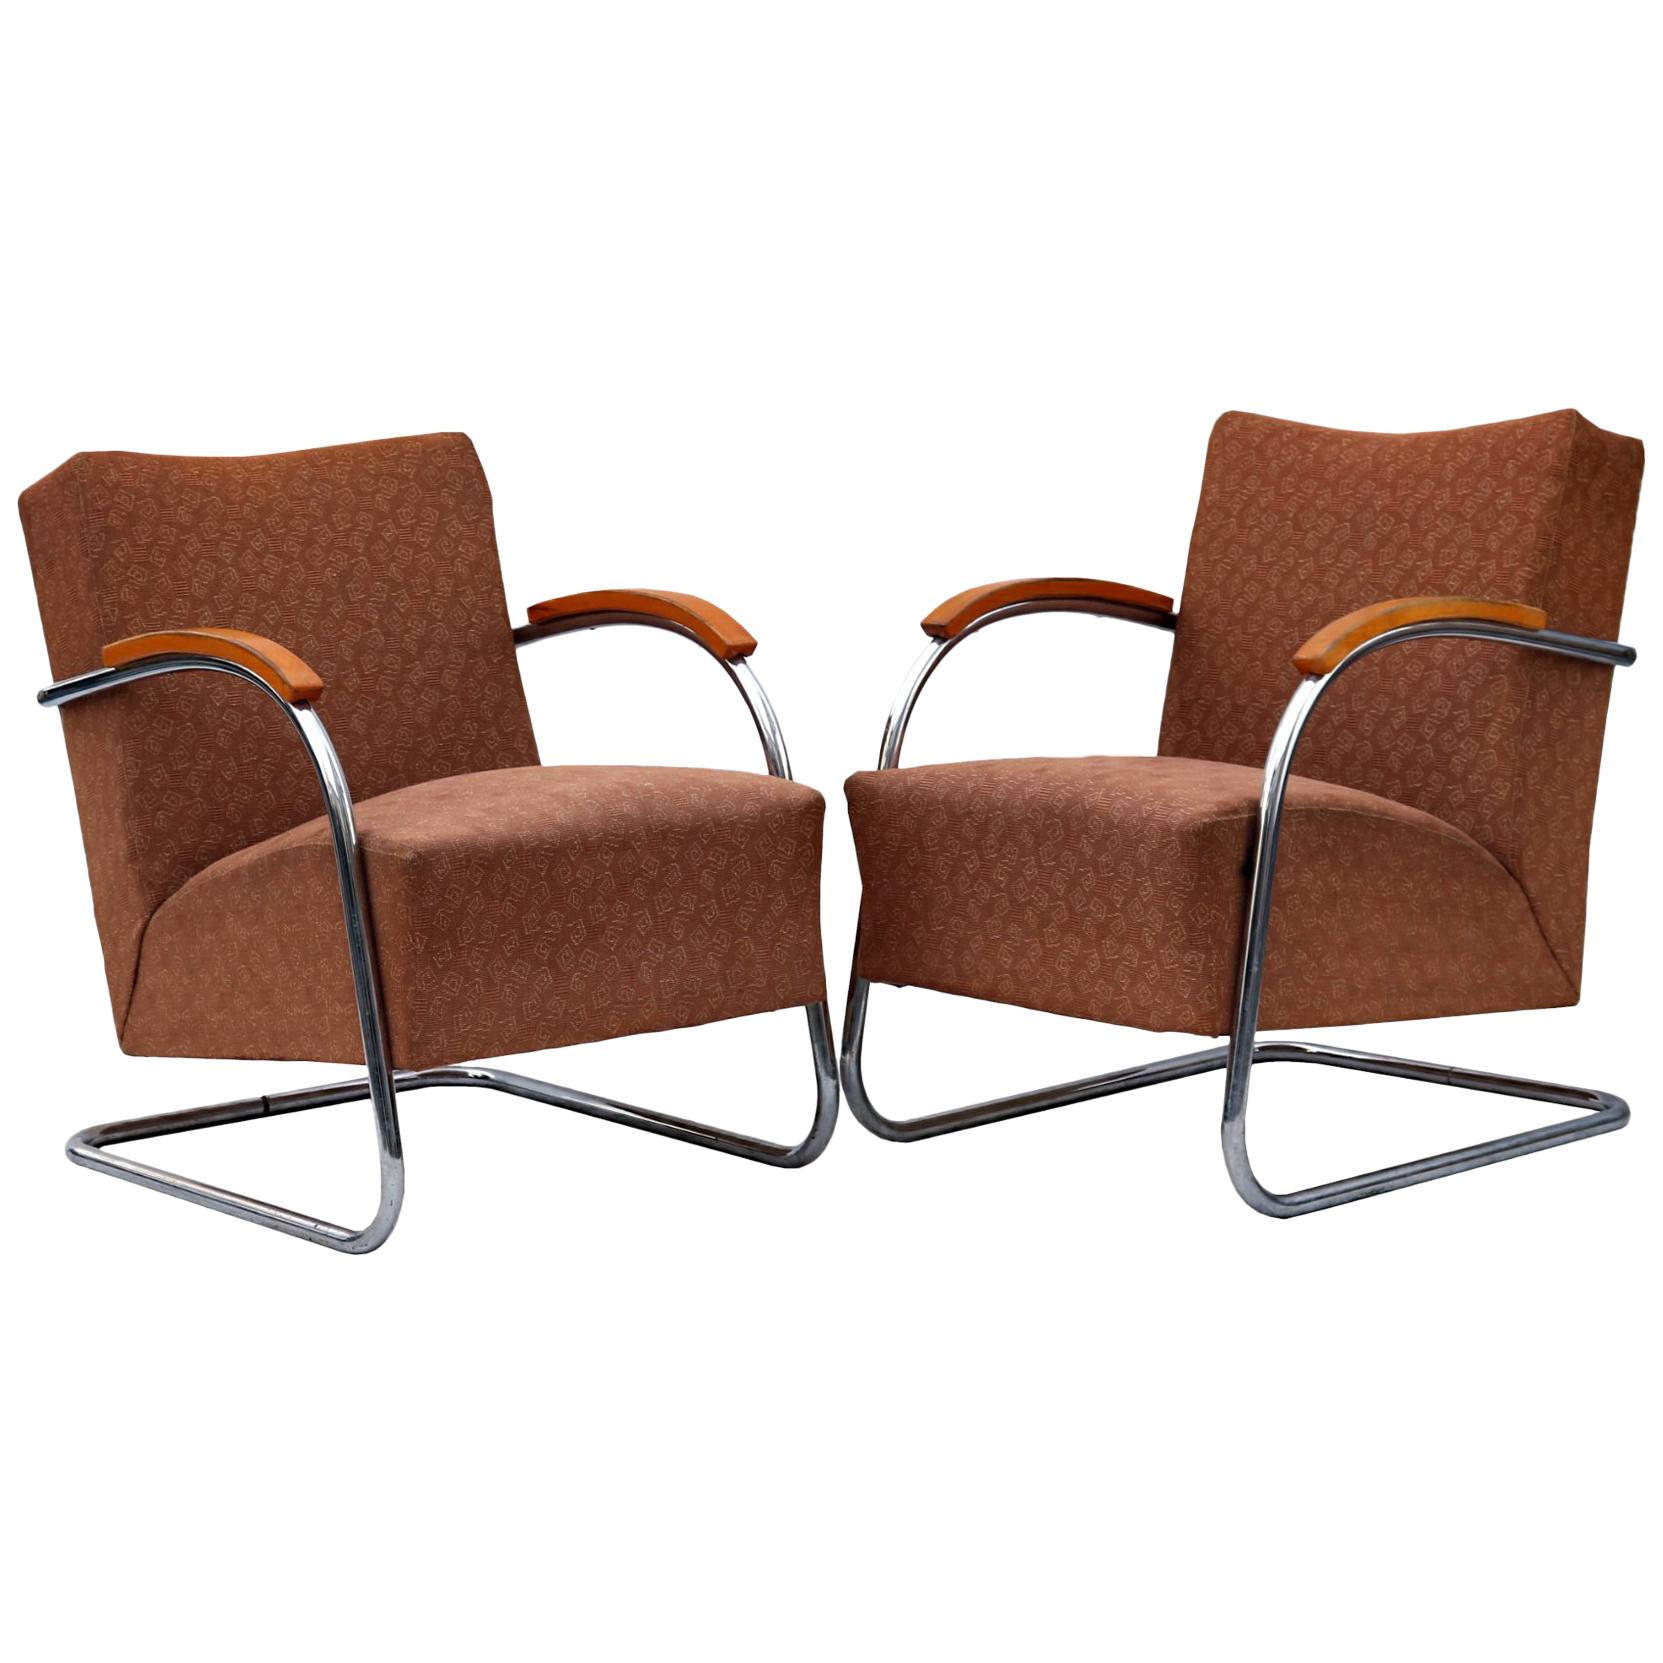 Pair of Tubular Steel Cantilever Armchairs Fn 21 by Mücke & Melder, circa 1930